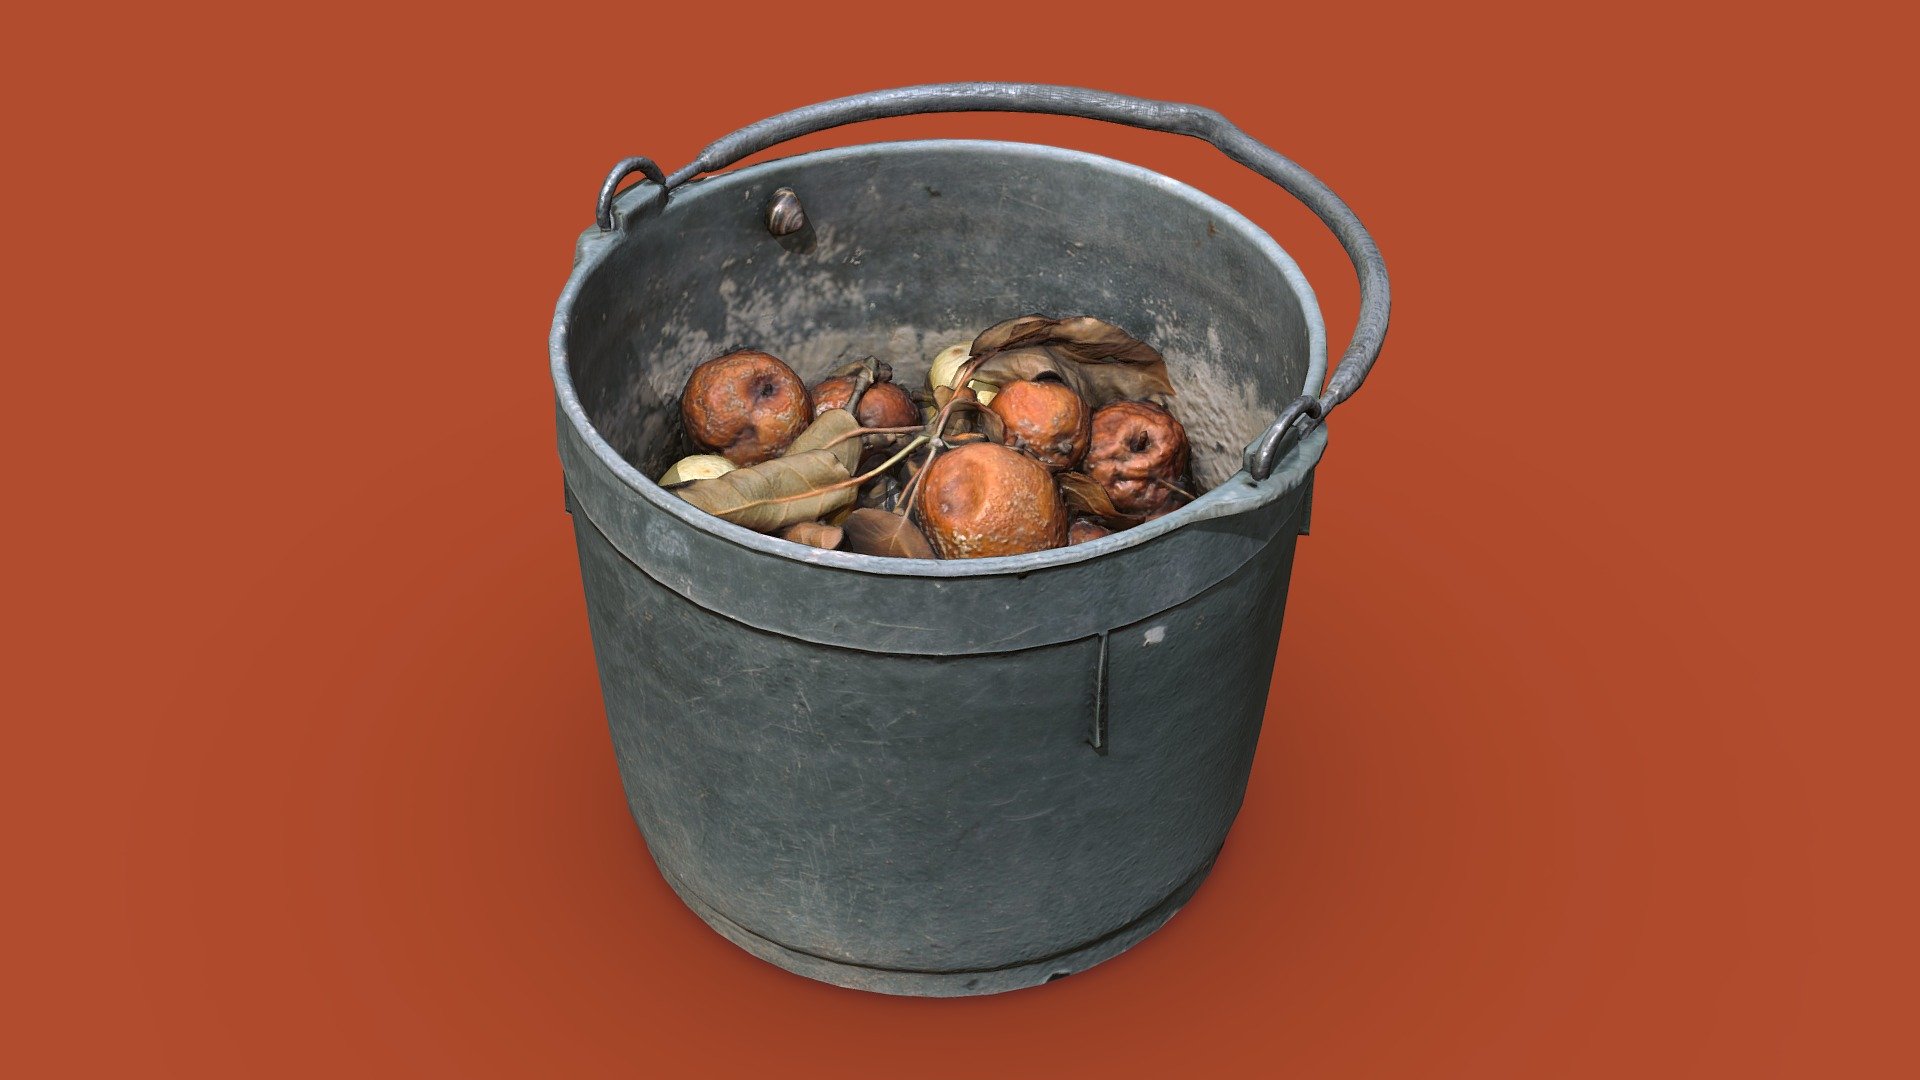 A photo scan of a bucket of rotten apples.
Made for my photogrammetry class in school 3d model